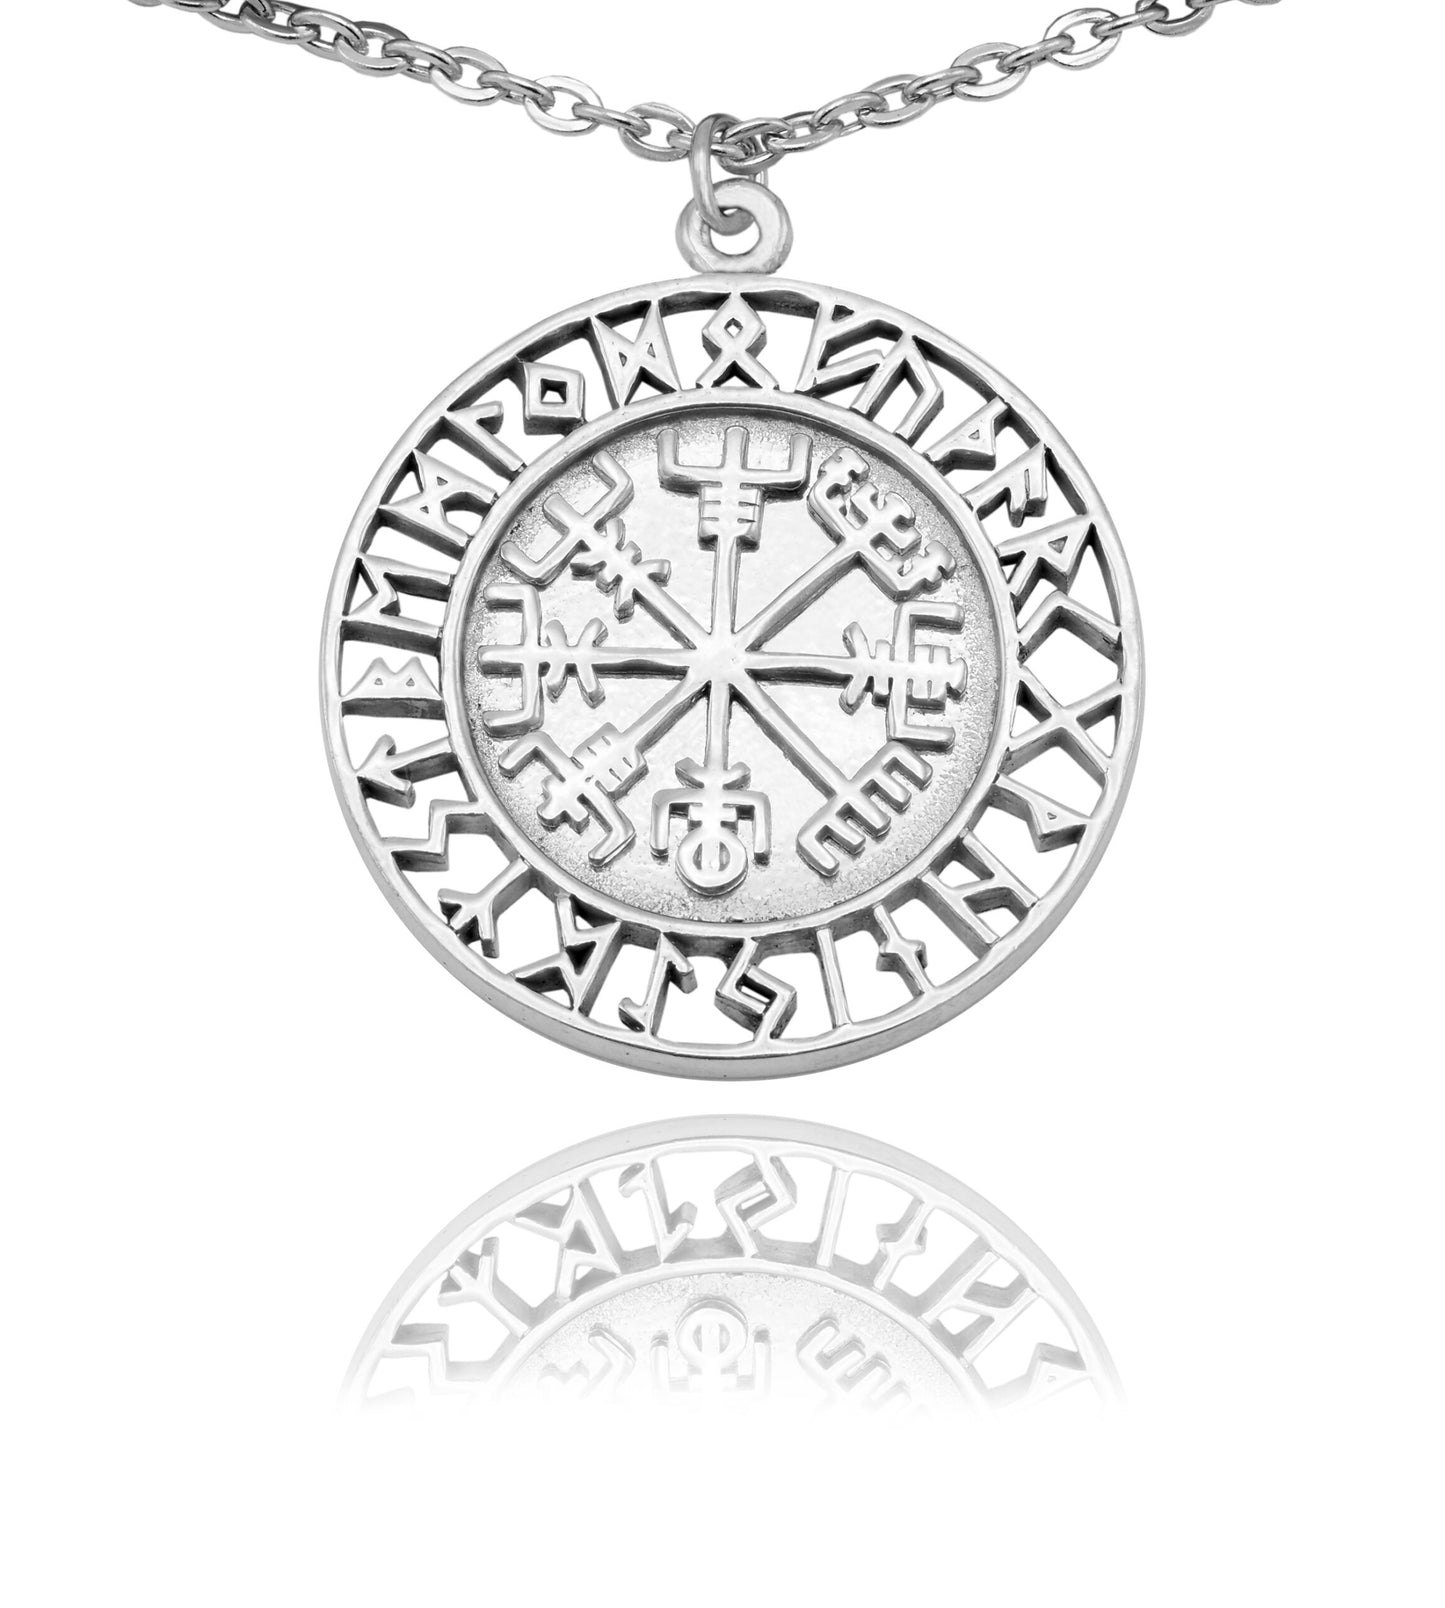 Quinnlyn & Co. Viking Compass Pendant Necklace, Thor Inspired Handmade Gifts for Men with Inspirational Quote on Greeting Card